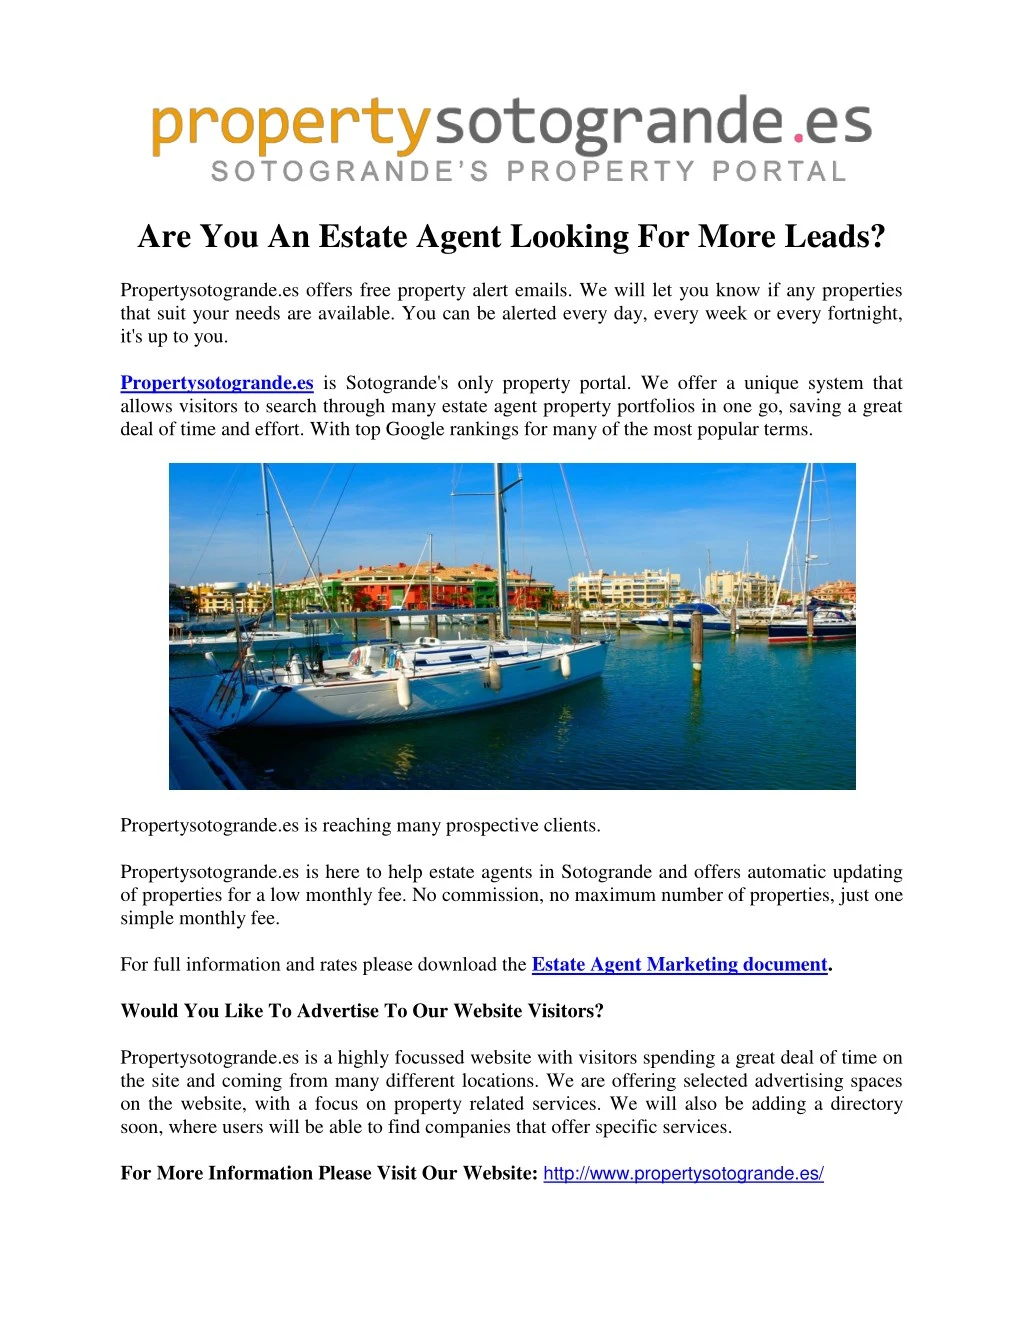 are you an estate agent looking for more leads